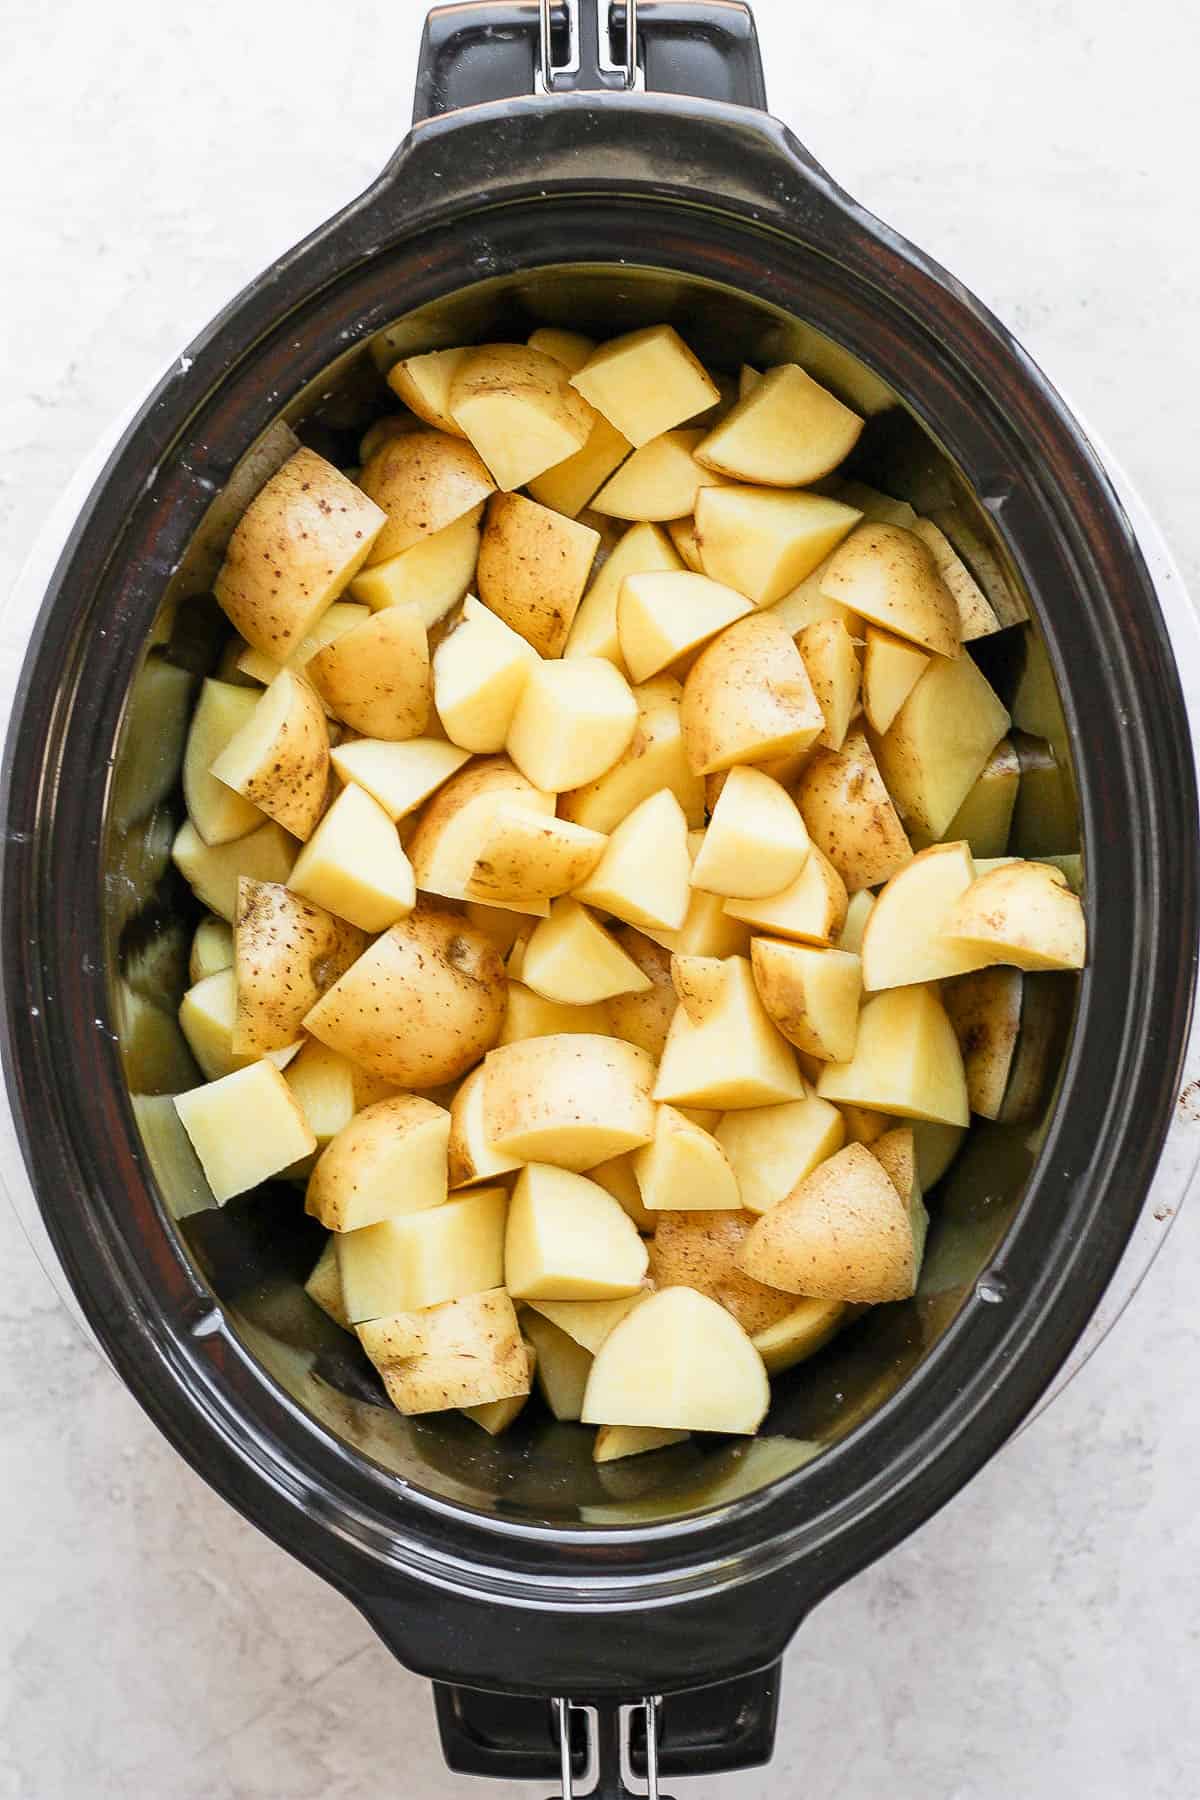 Cubed yukon gold potatoes inside a slow cooker. 